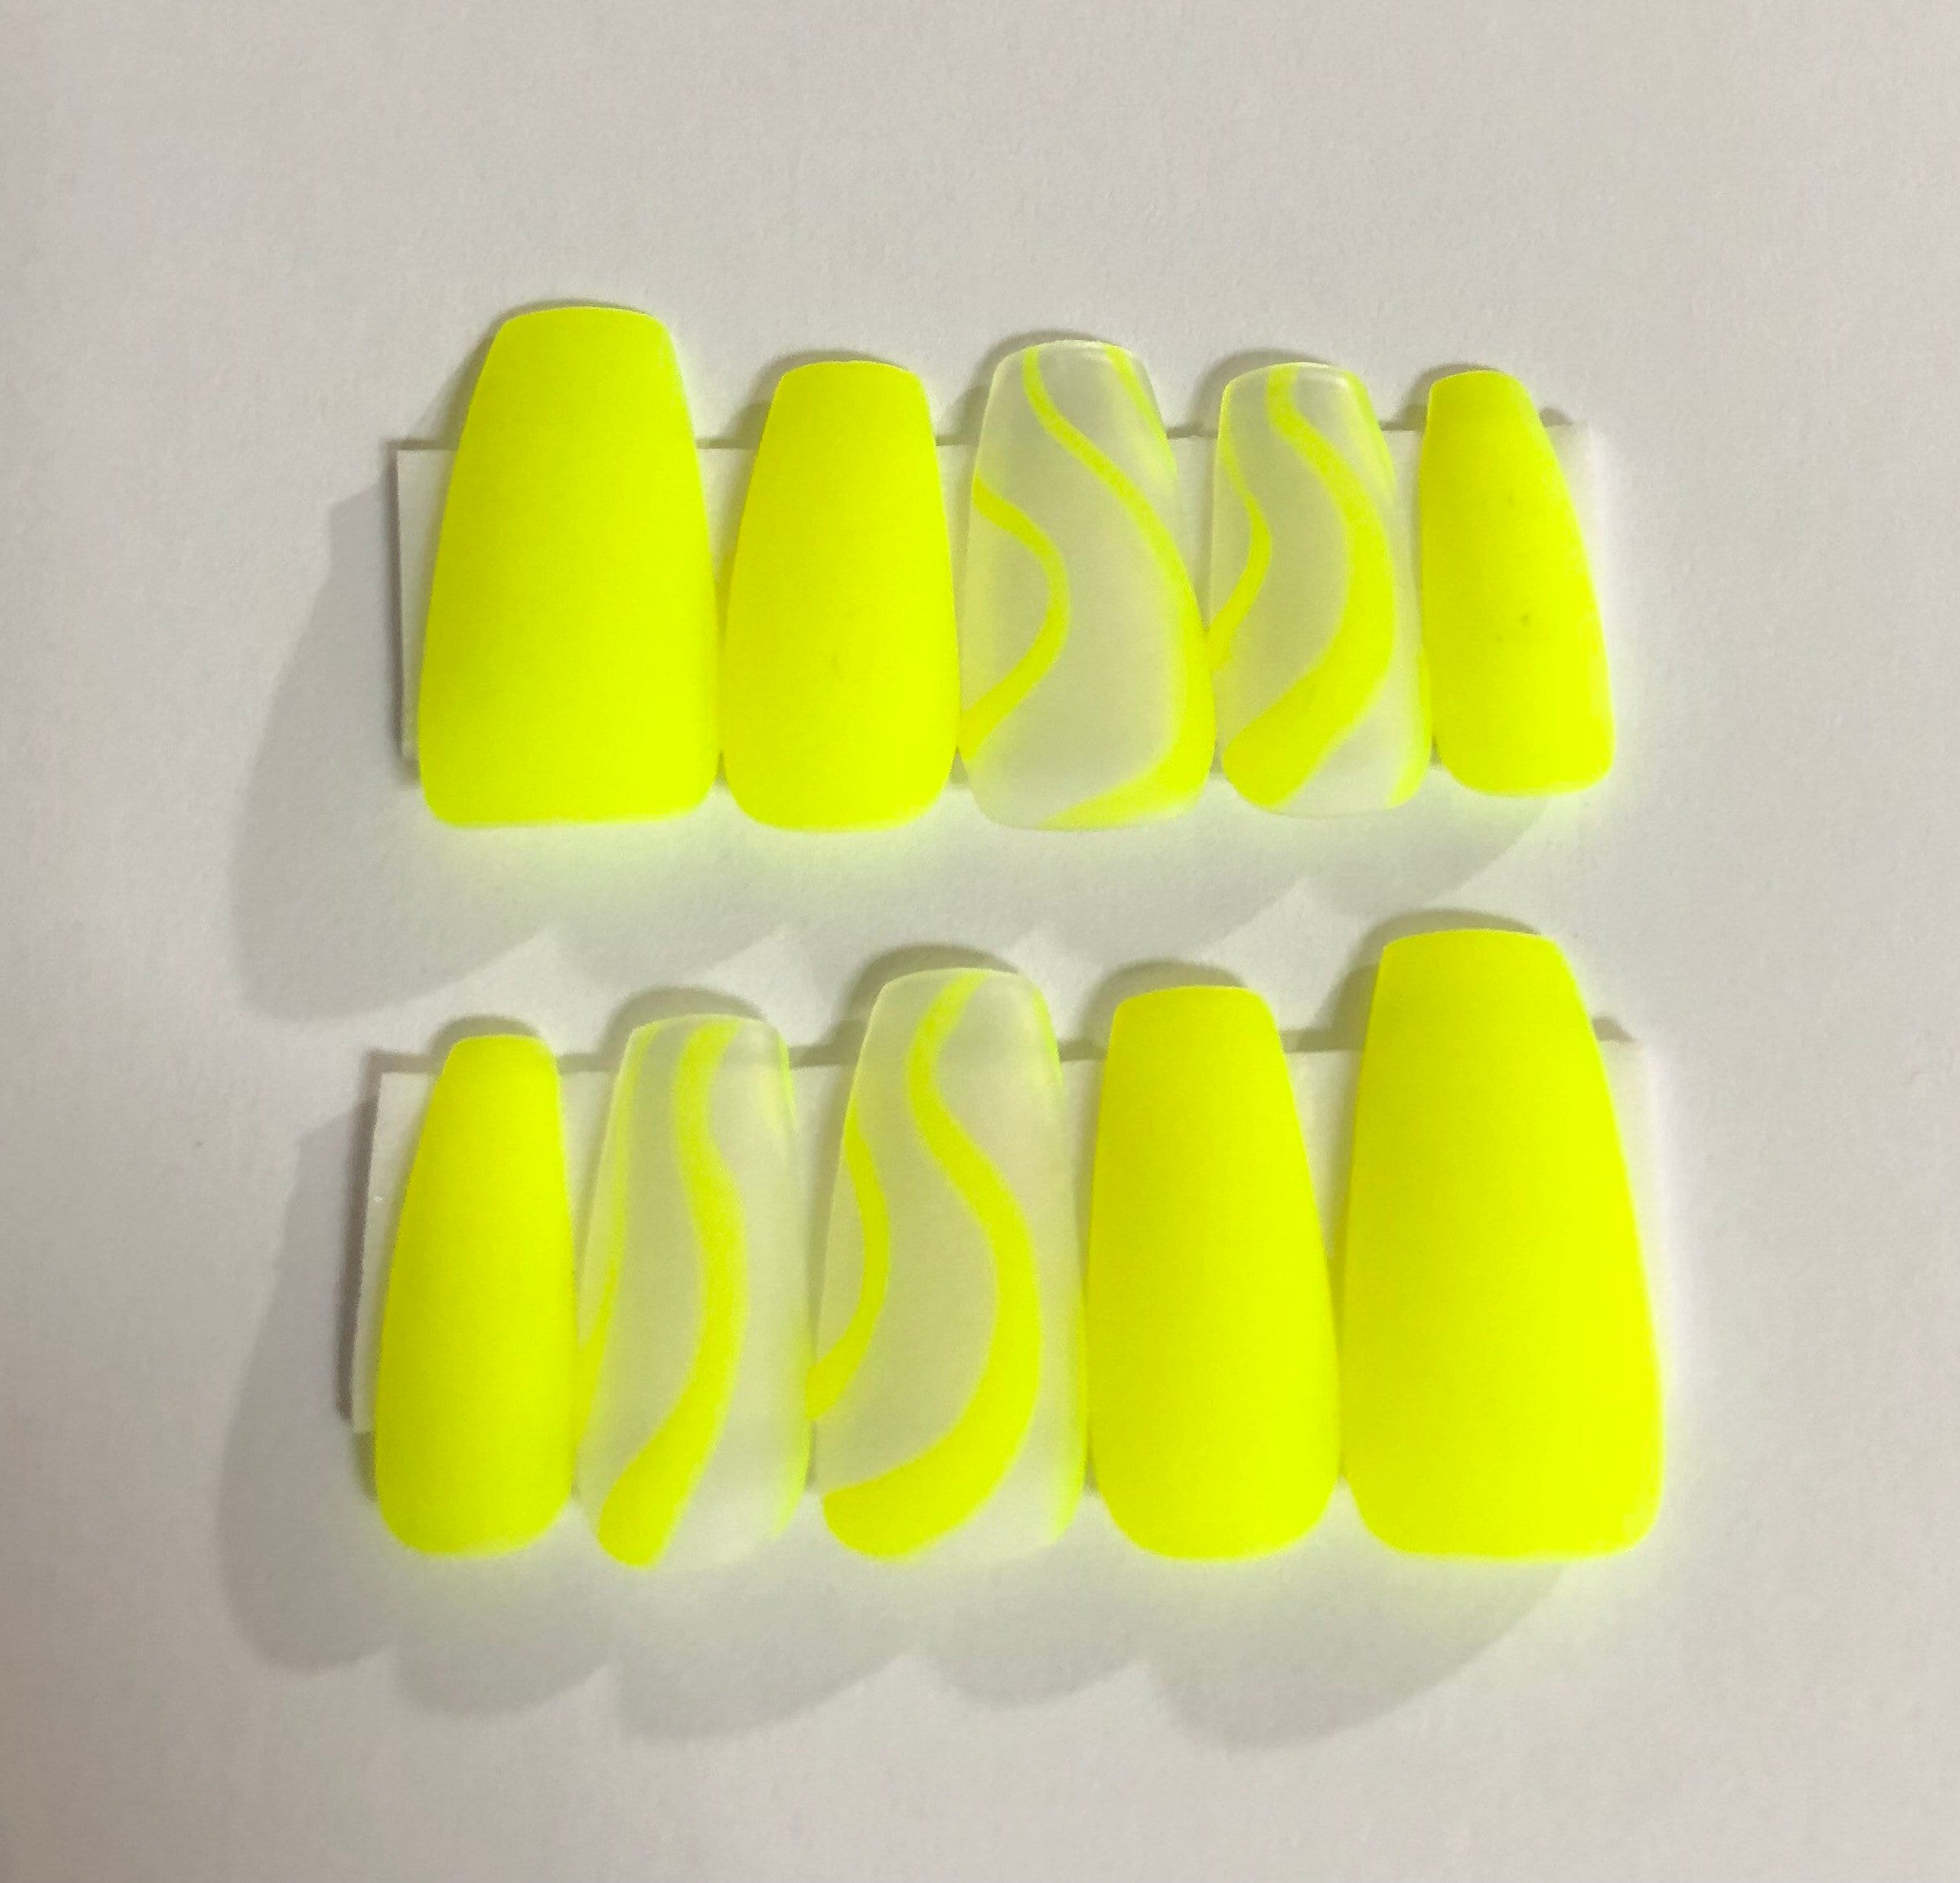 How to get PERFECT NEON YELLOW OR FLUORESCENT YELLOW WHIPPING